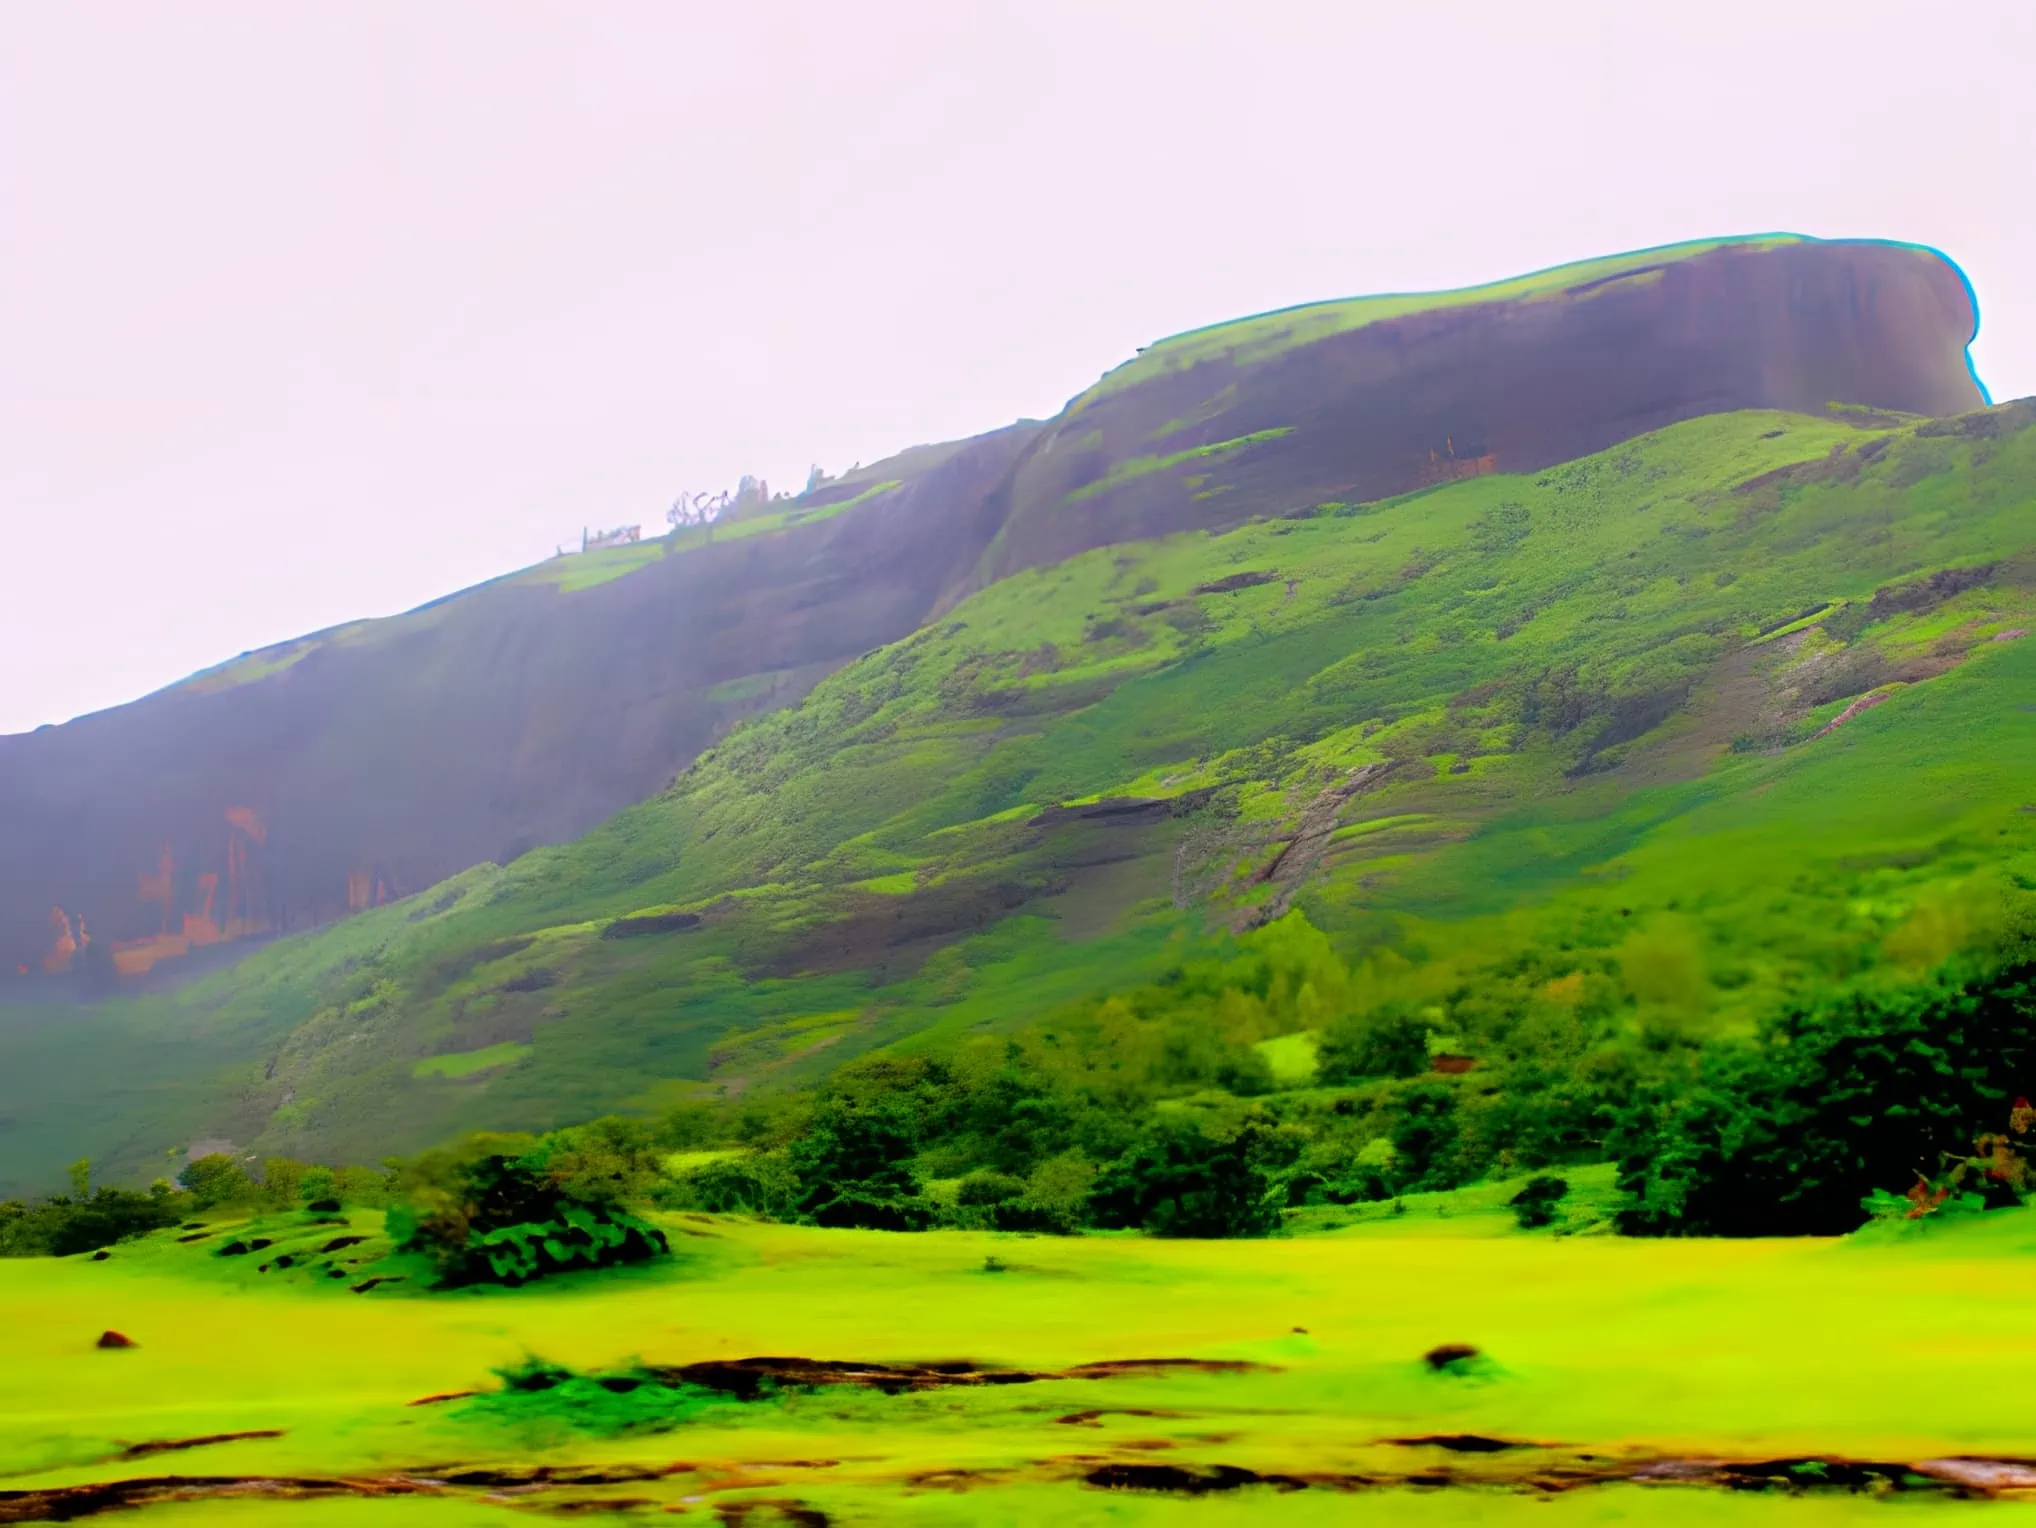 Hadsar fort which also known as Parvatgad